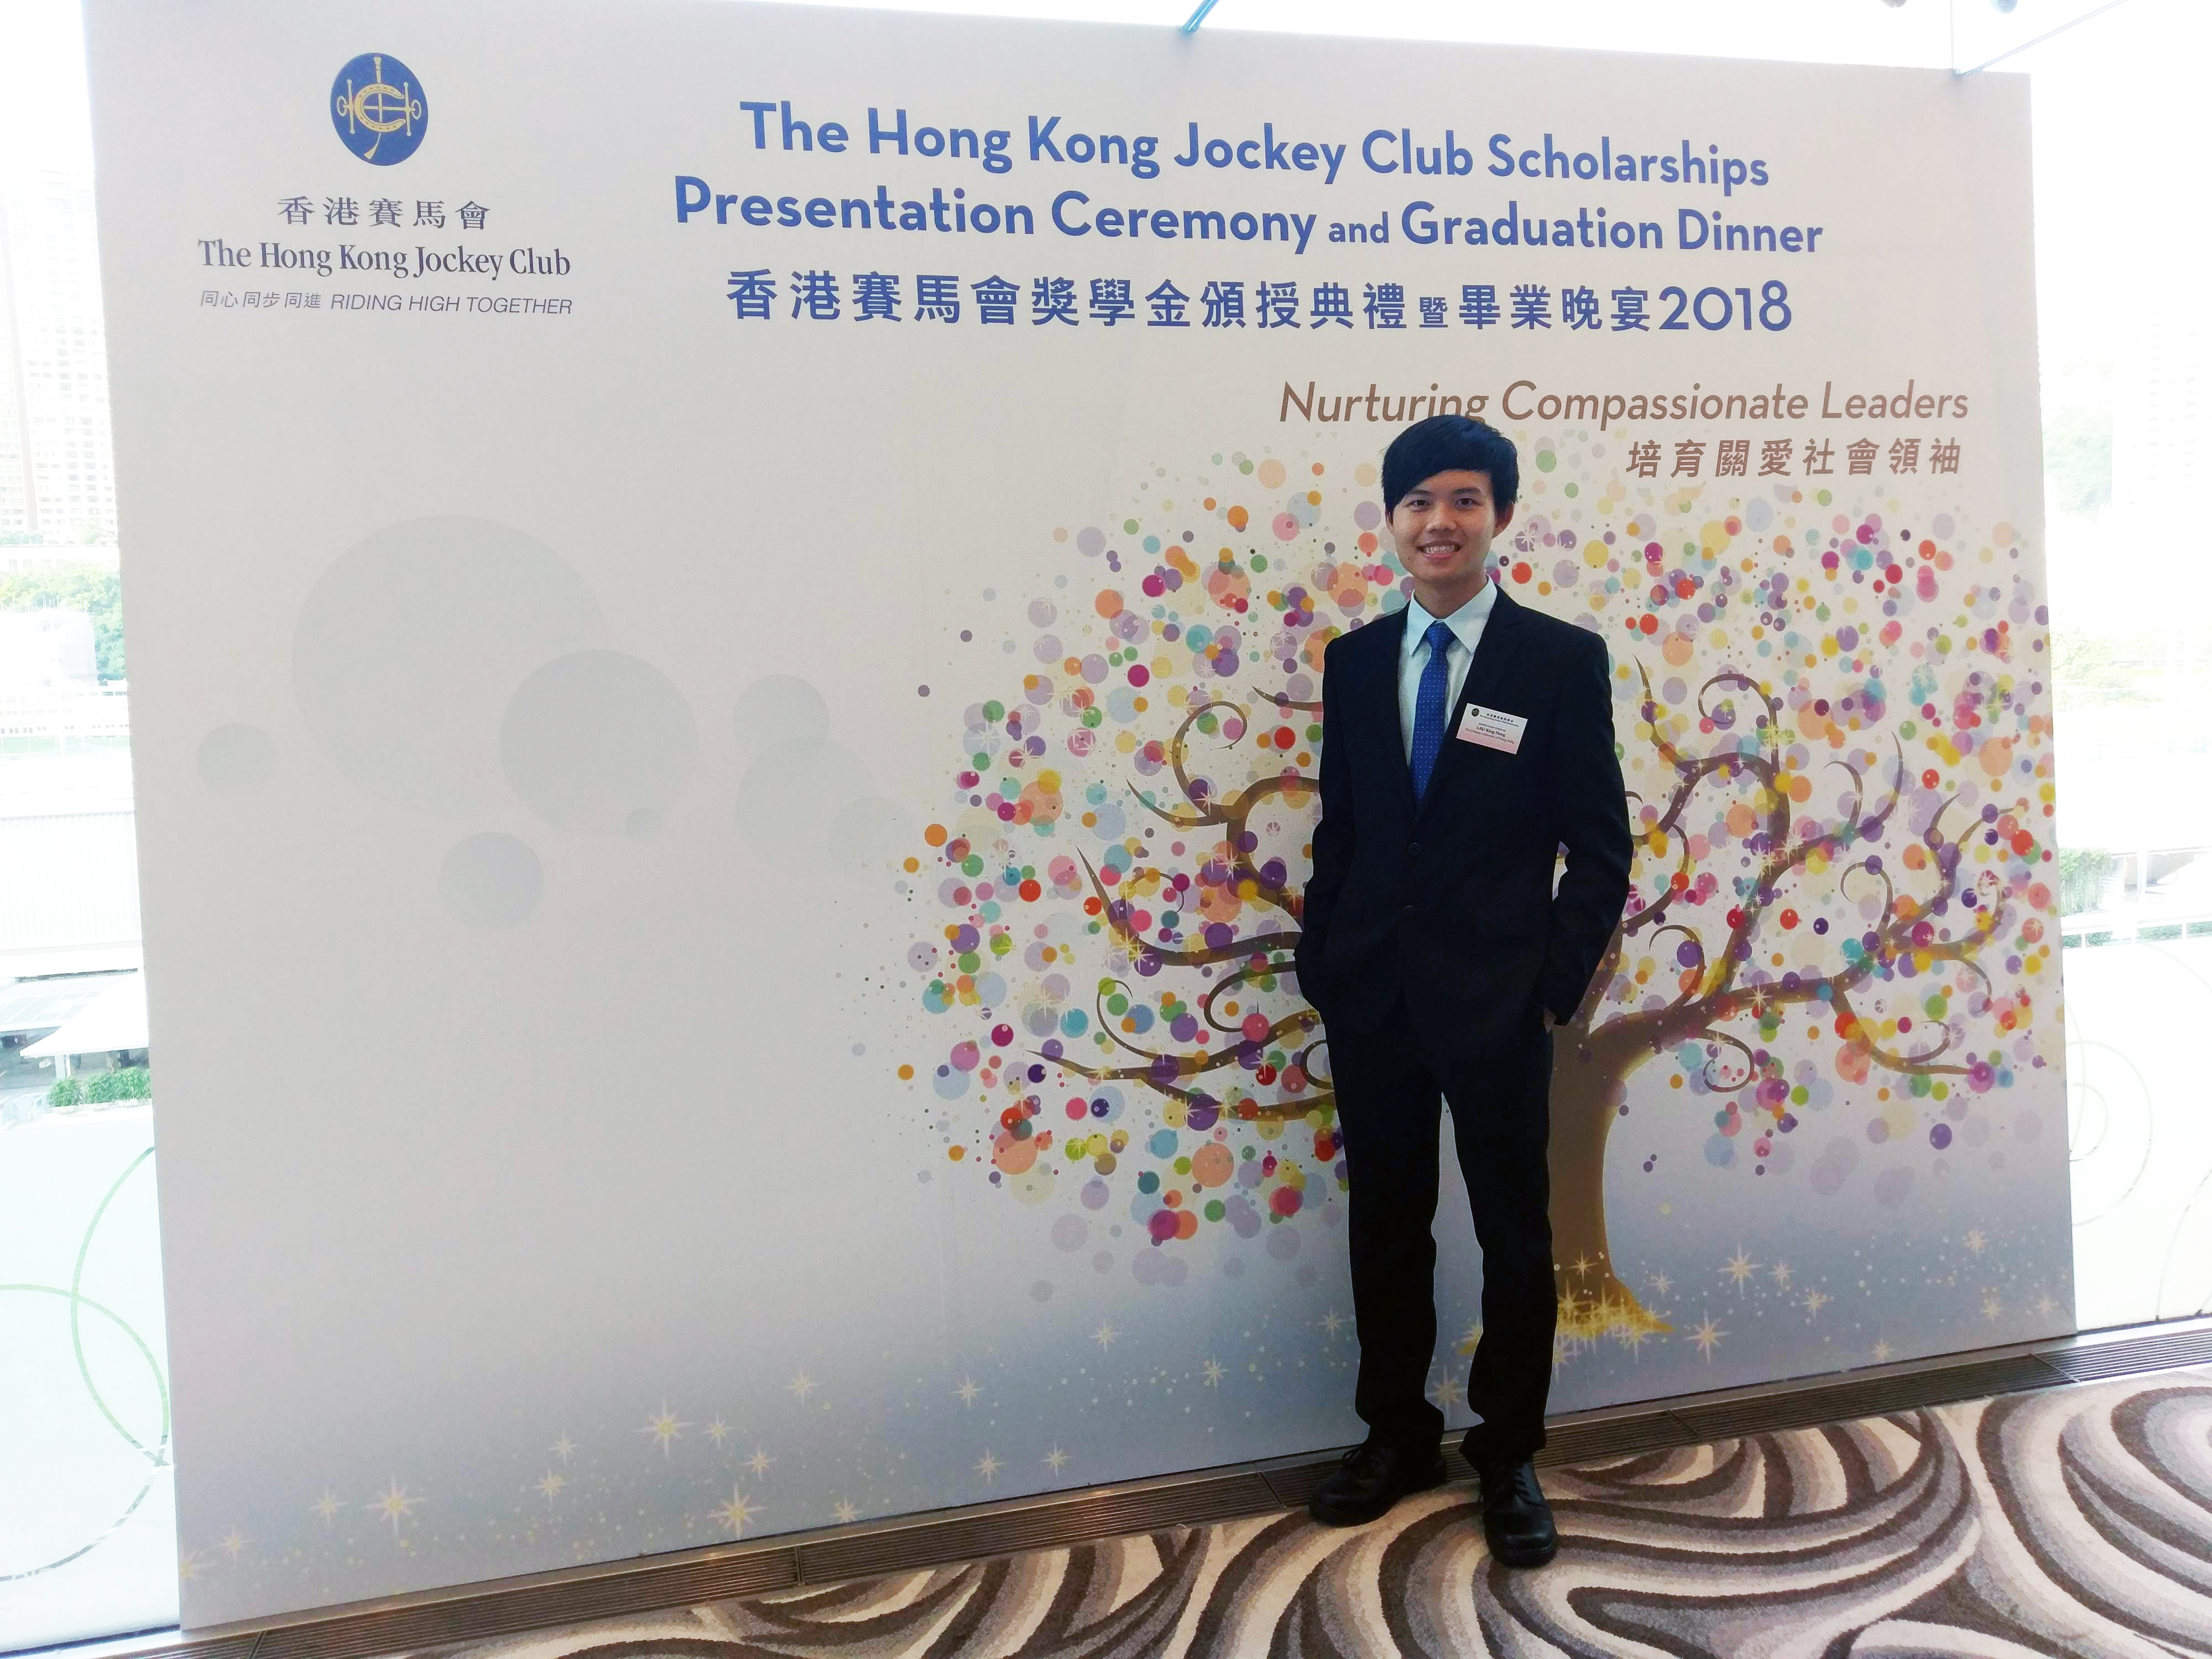 King Heng has received two prestigious scholarships to support him on his journey of atmospheric science